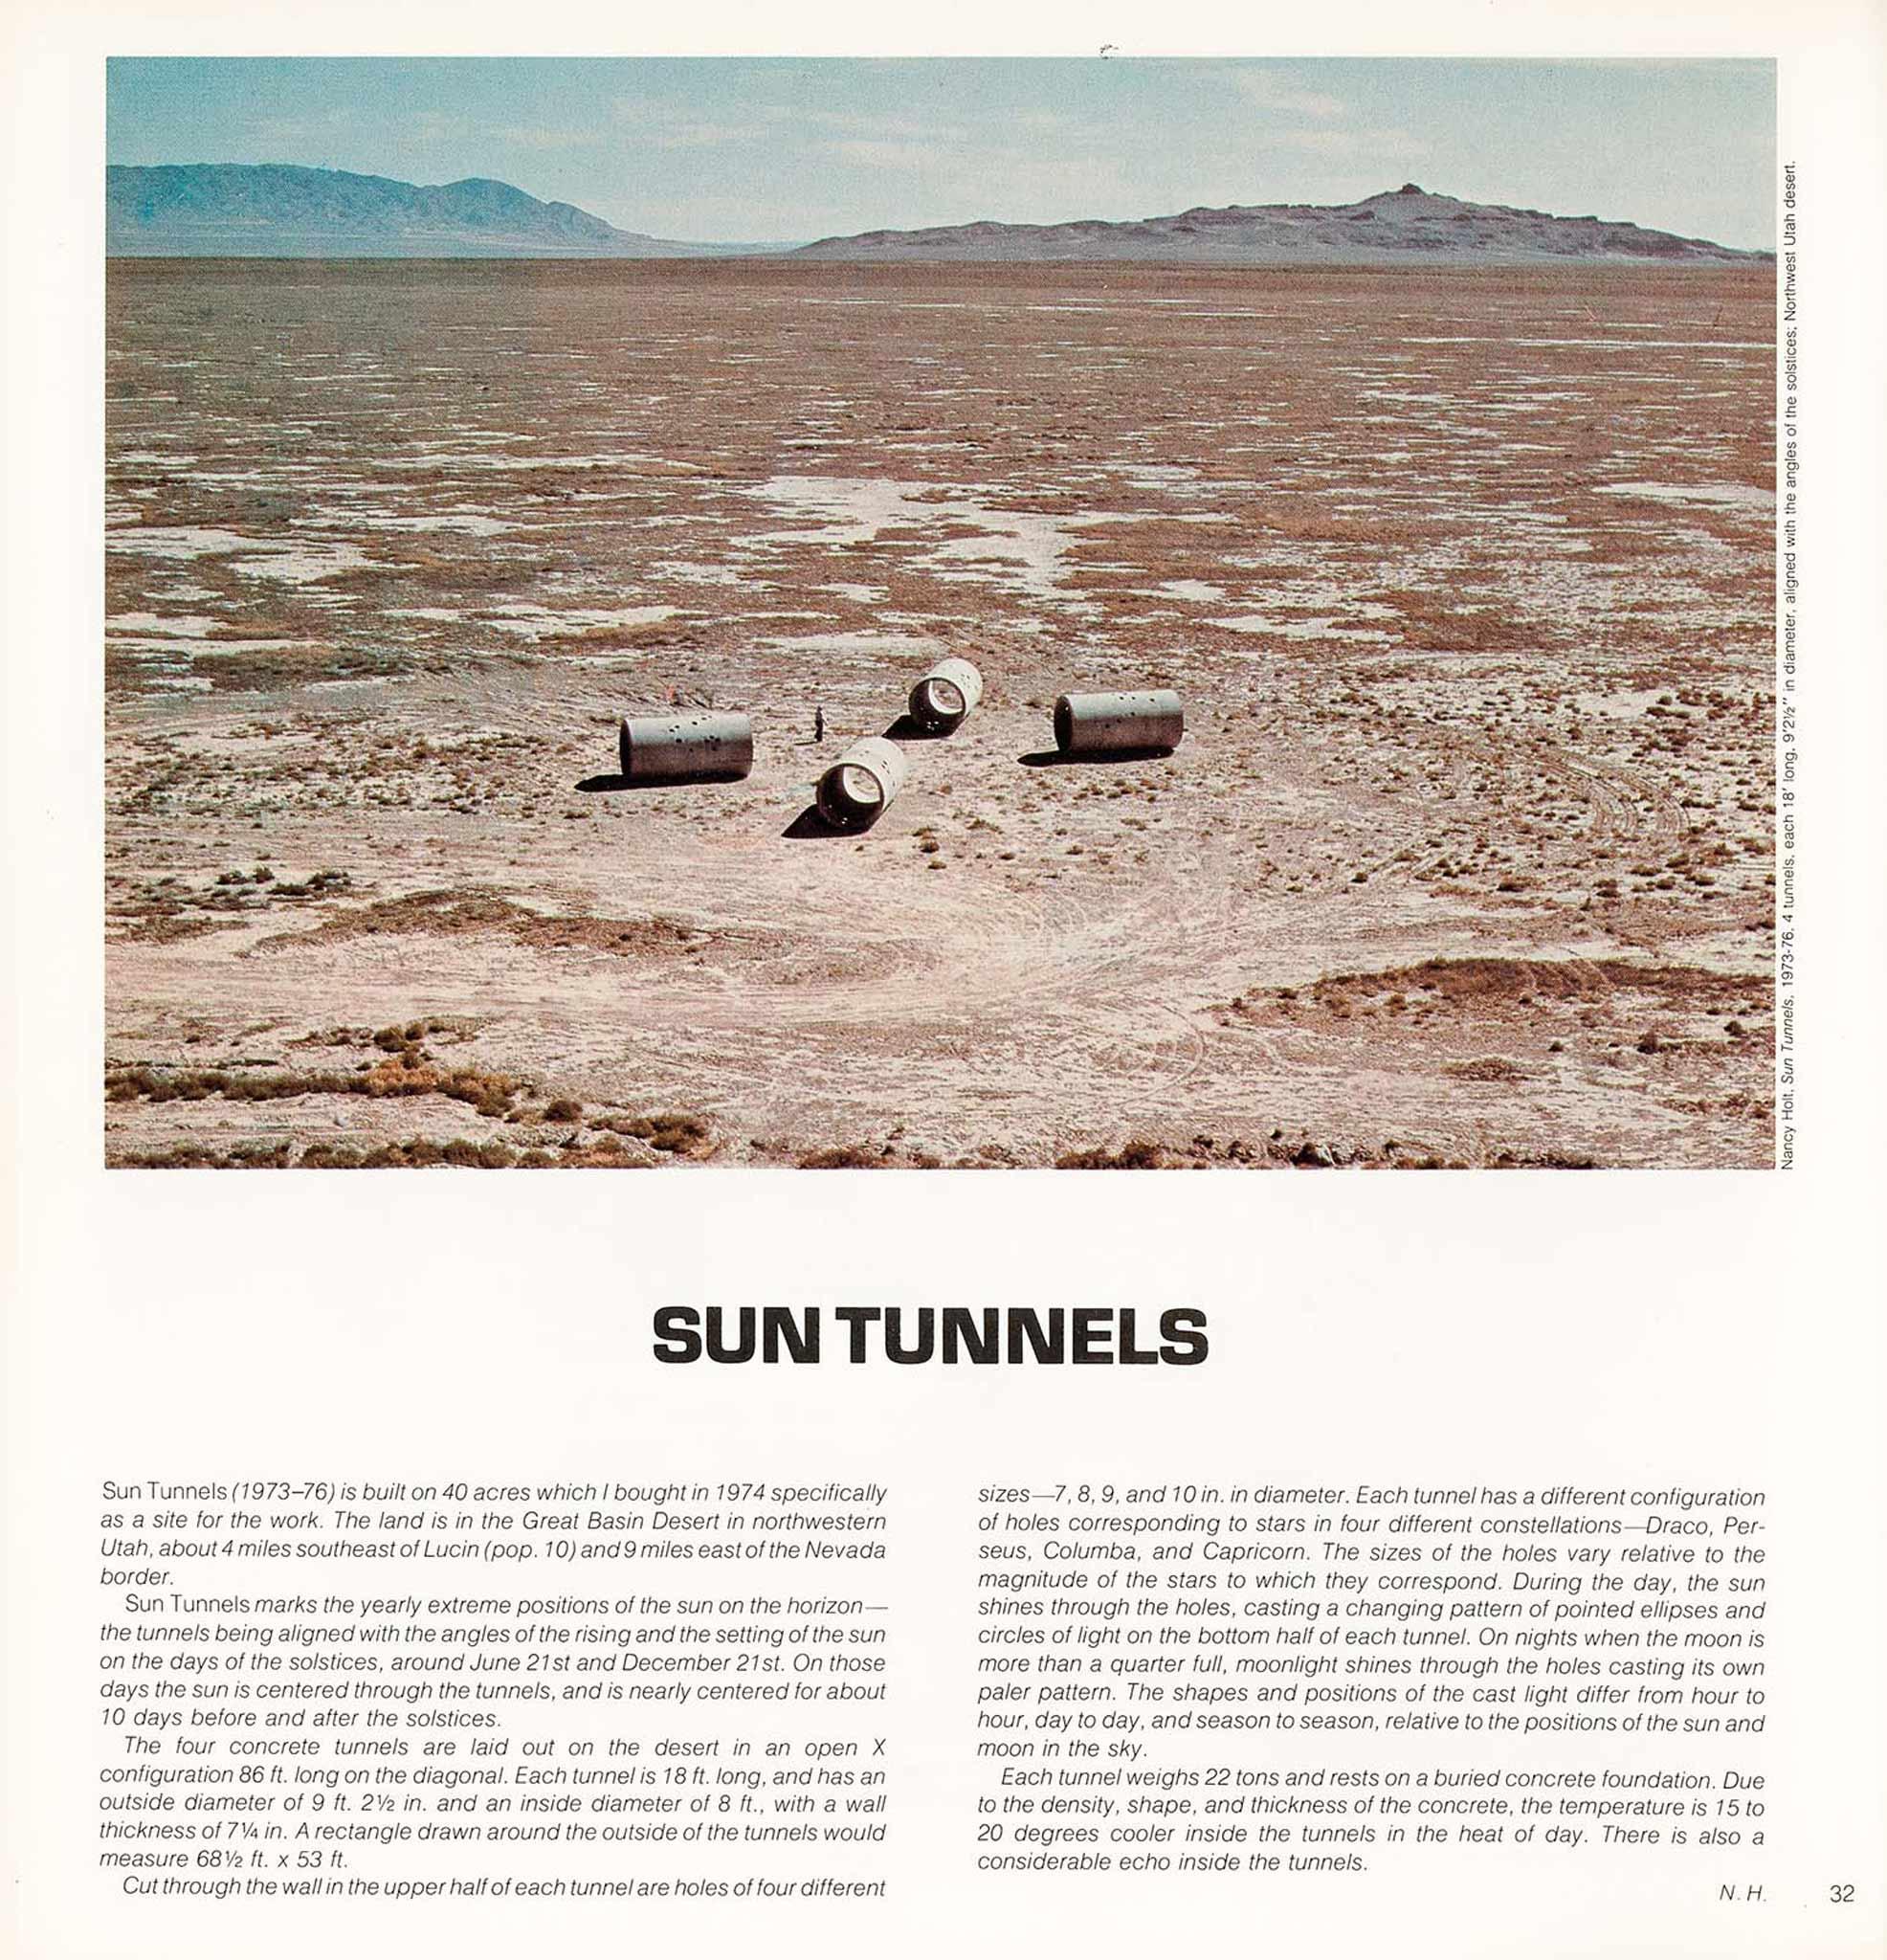 Magazine layout with image on top with text underneath. aerial image of the desert with mountains in the background.  In the center of the image are four concrete tunnels aligned in an X shape. 